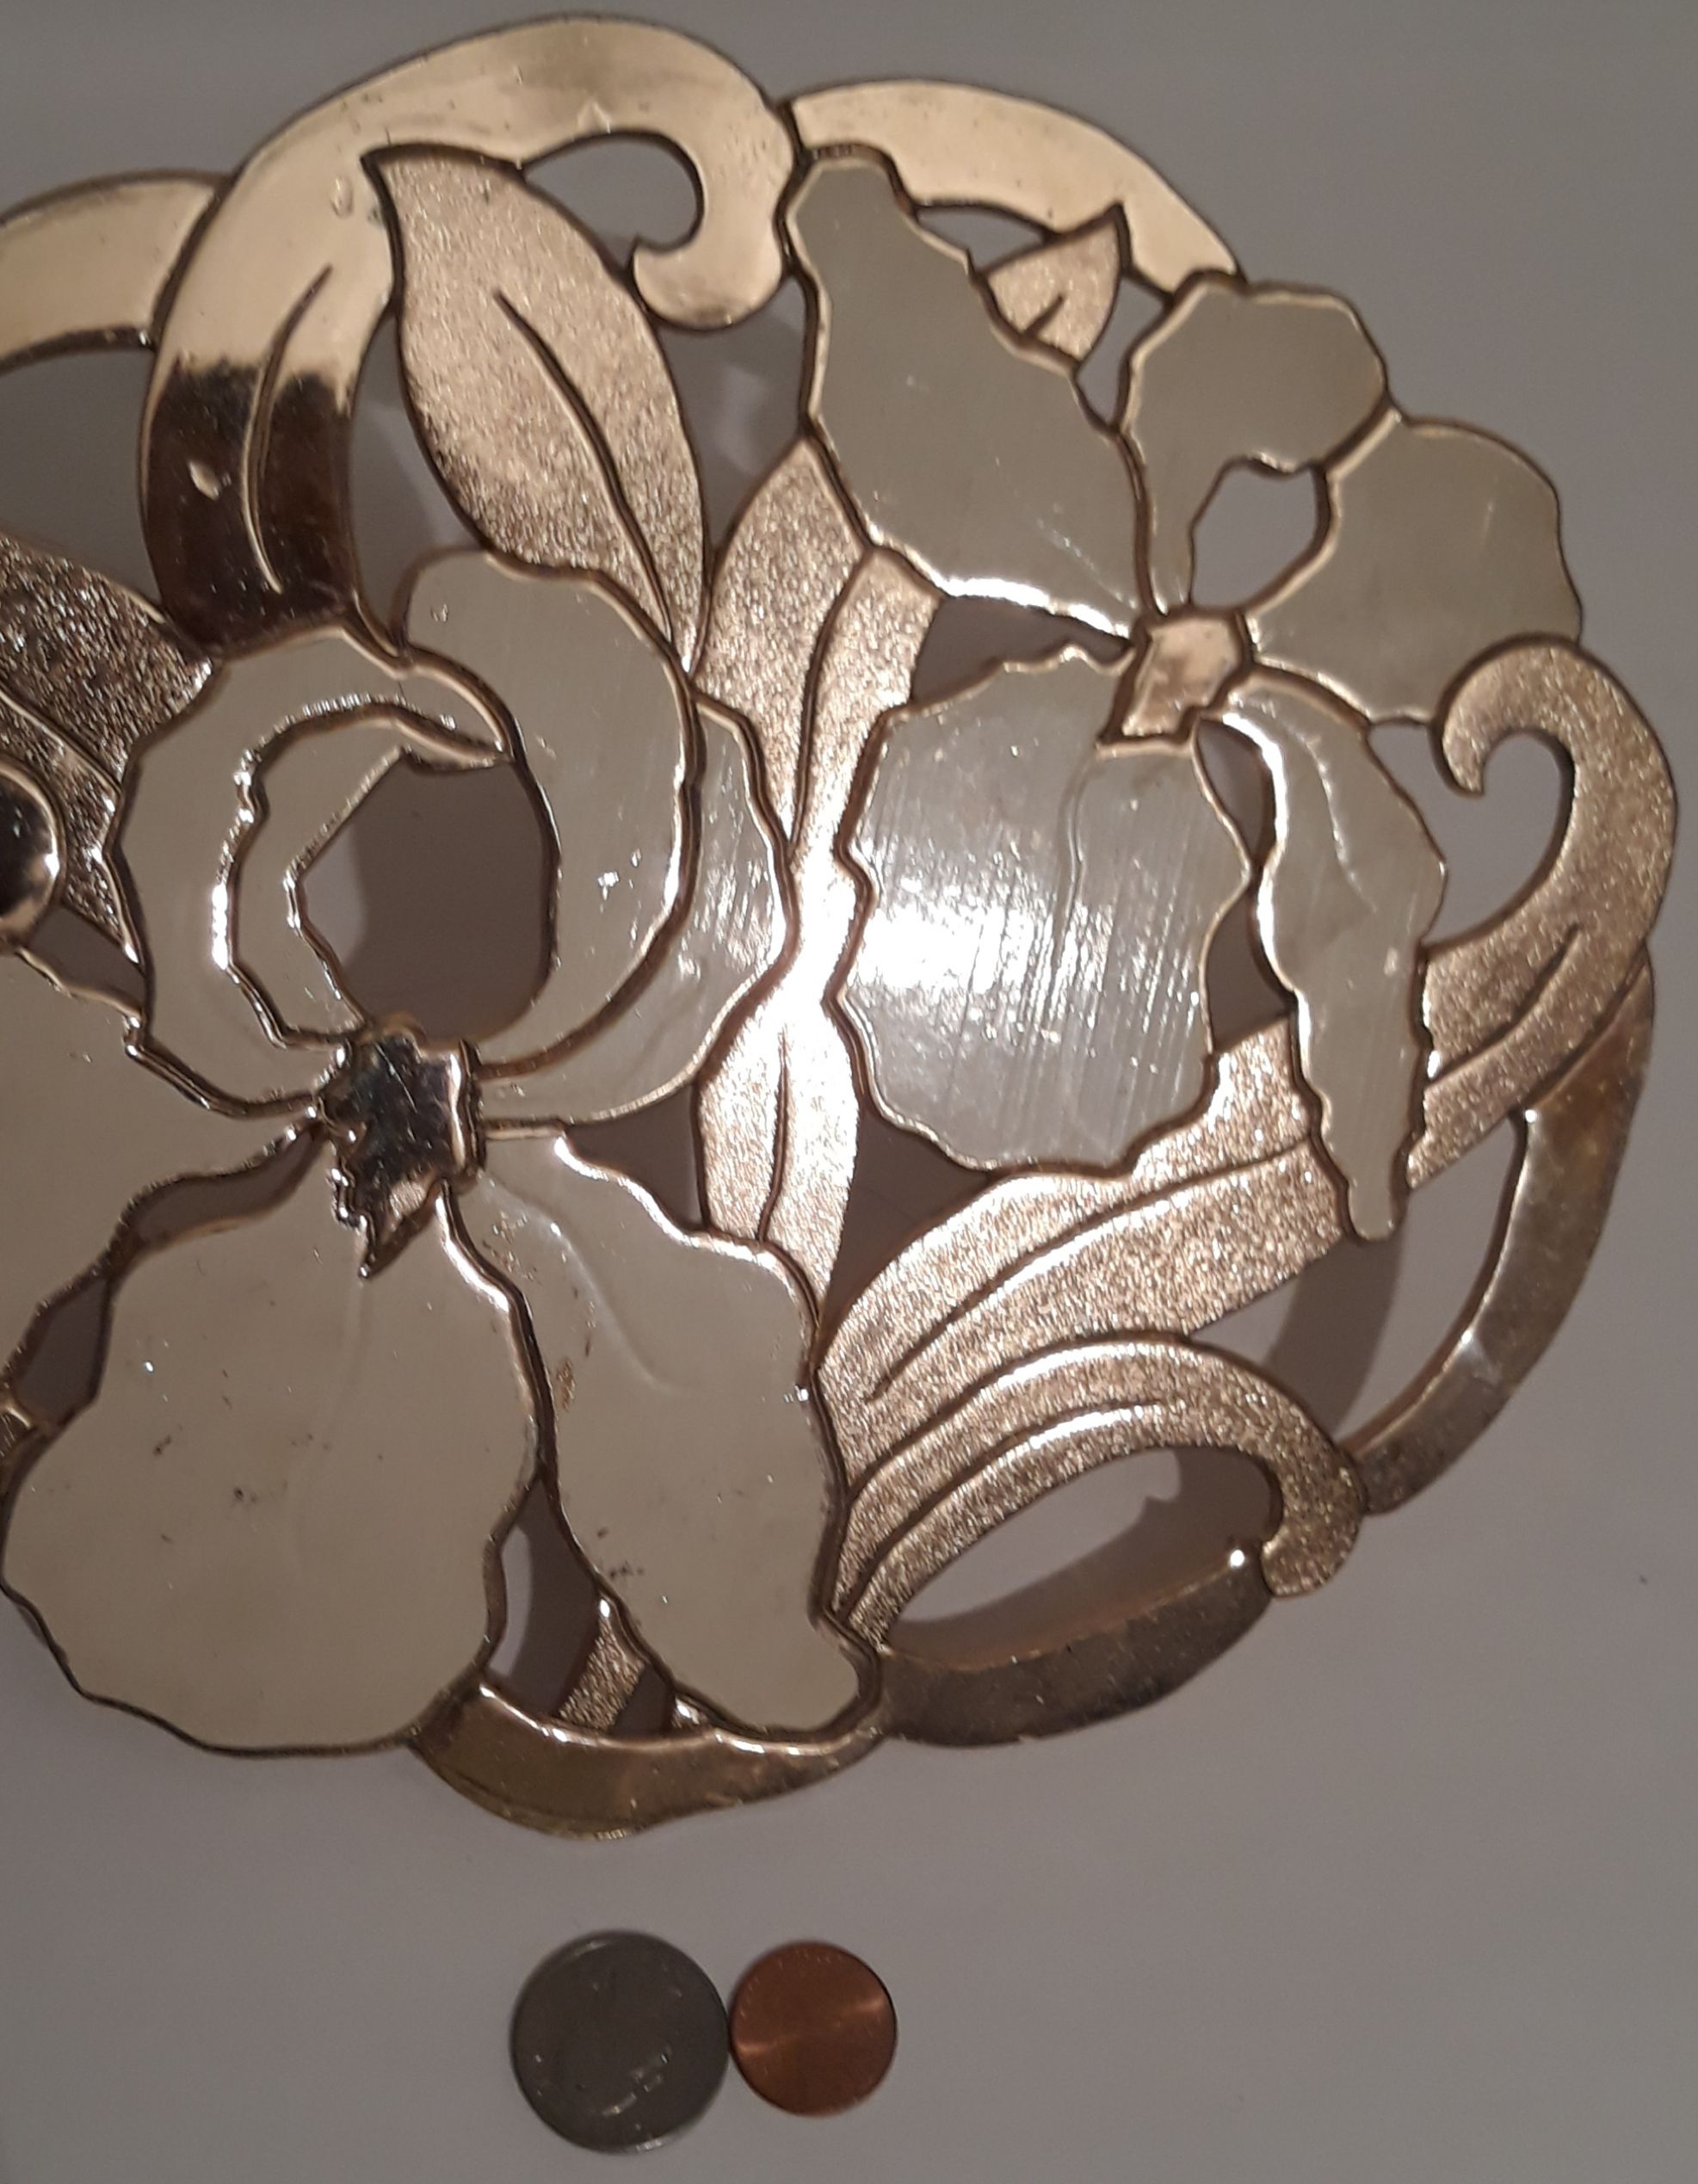 Vintage Metal Brass and White Enamel Flowers, Pot Holder, 9" x 8", W.M. Rogers, Made in Japan, Quality Brass, Kitchen Decor, Table Display